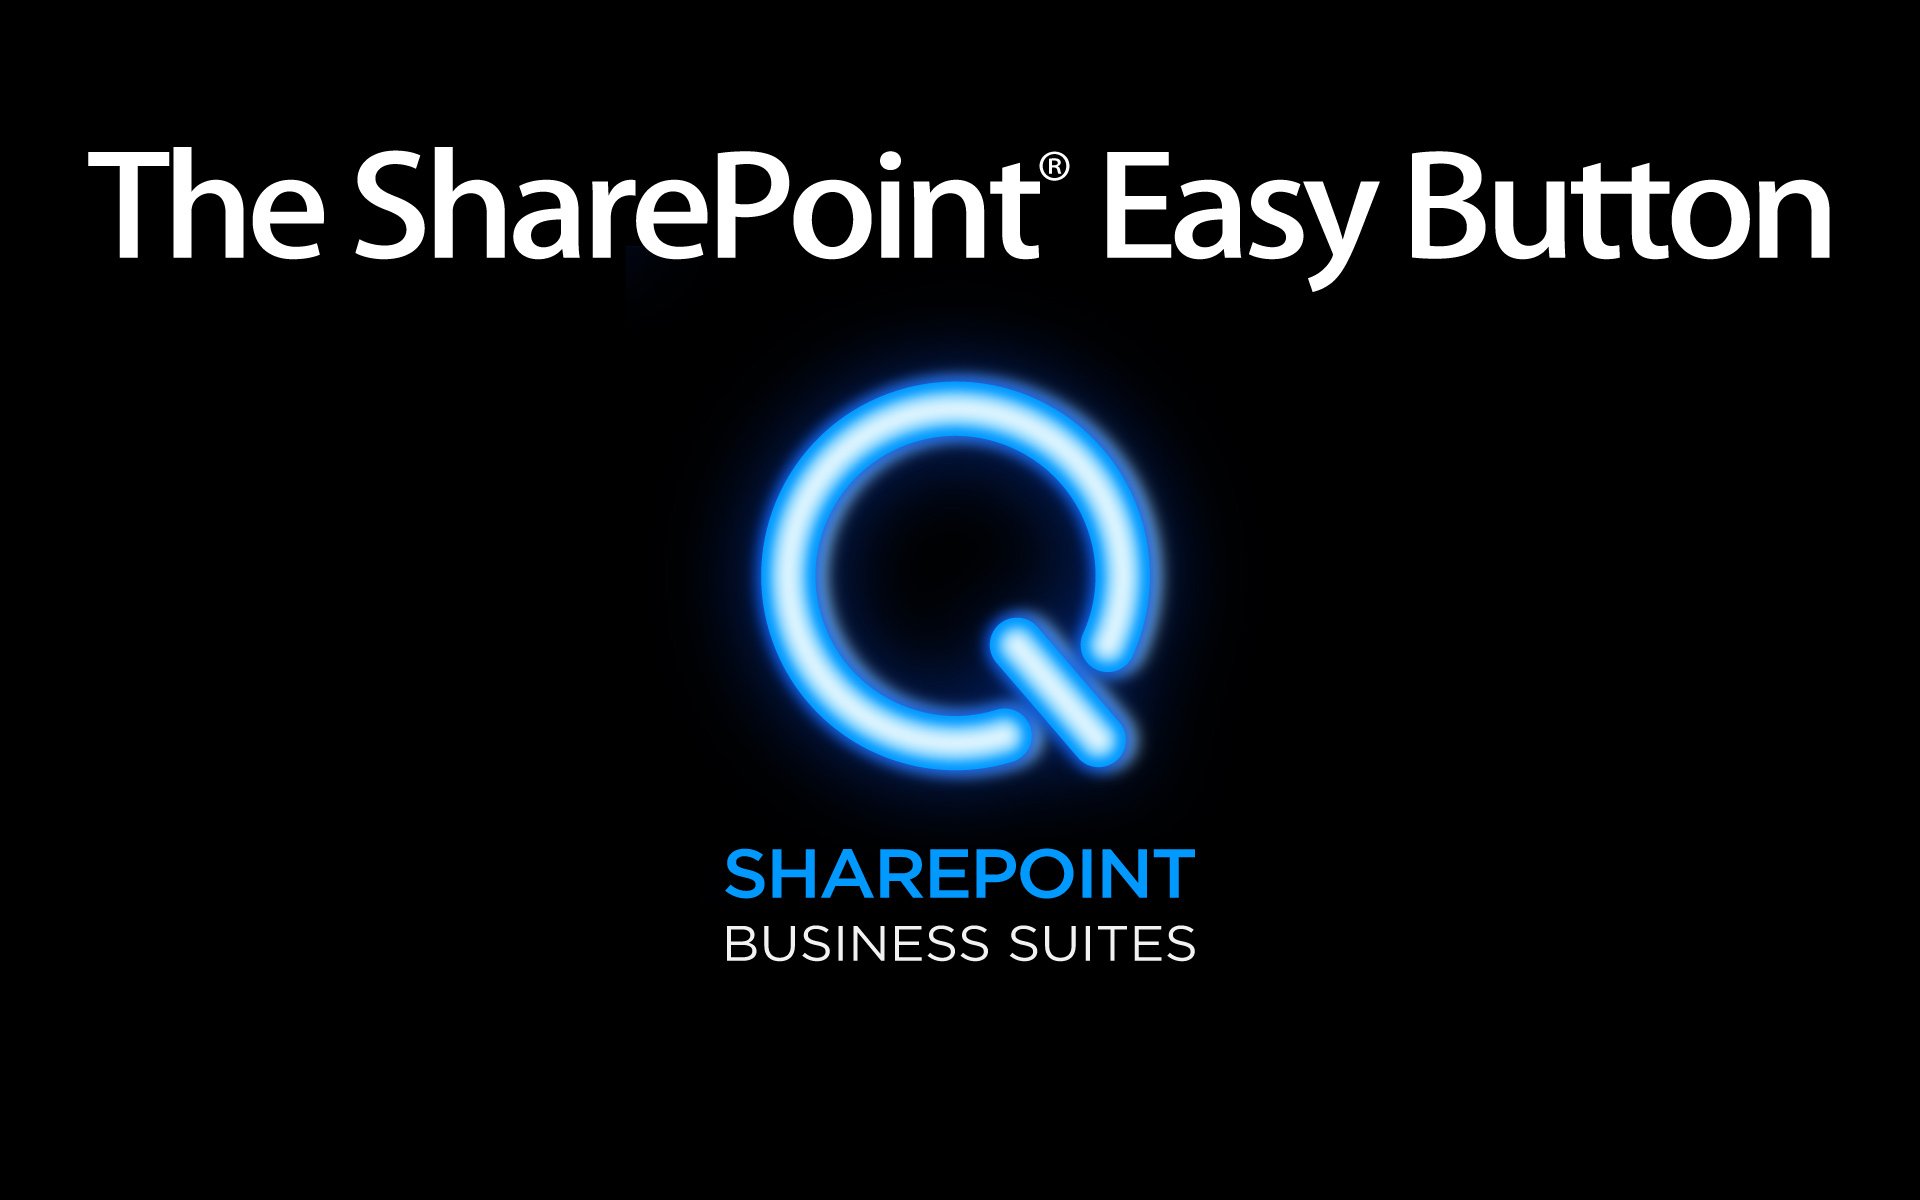 The SharePoint Easy Button